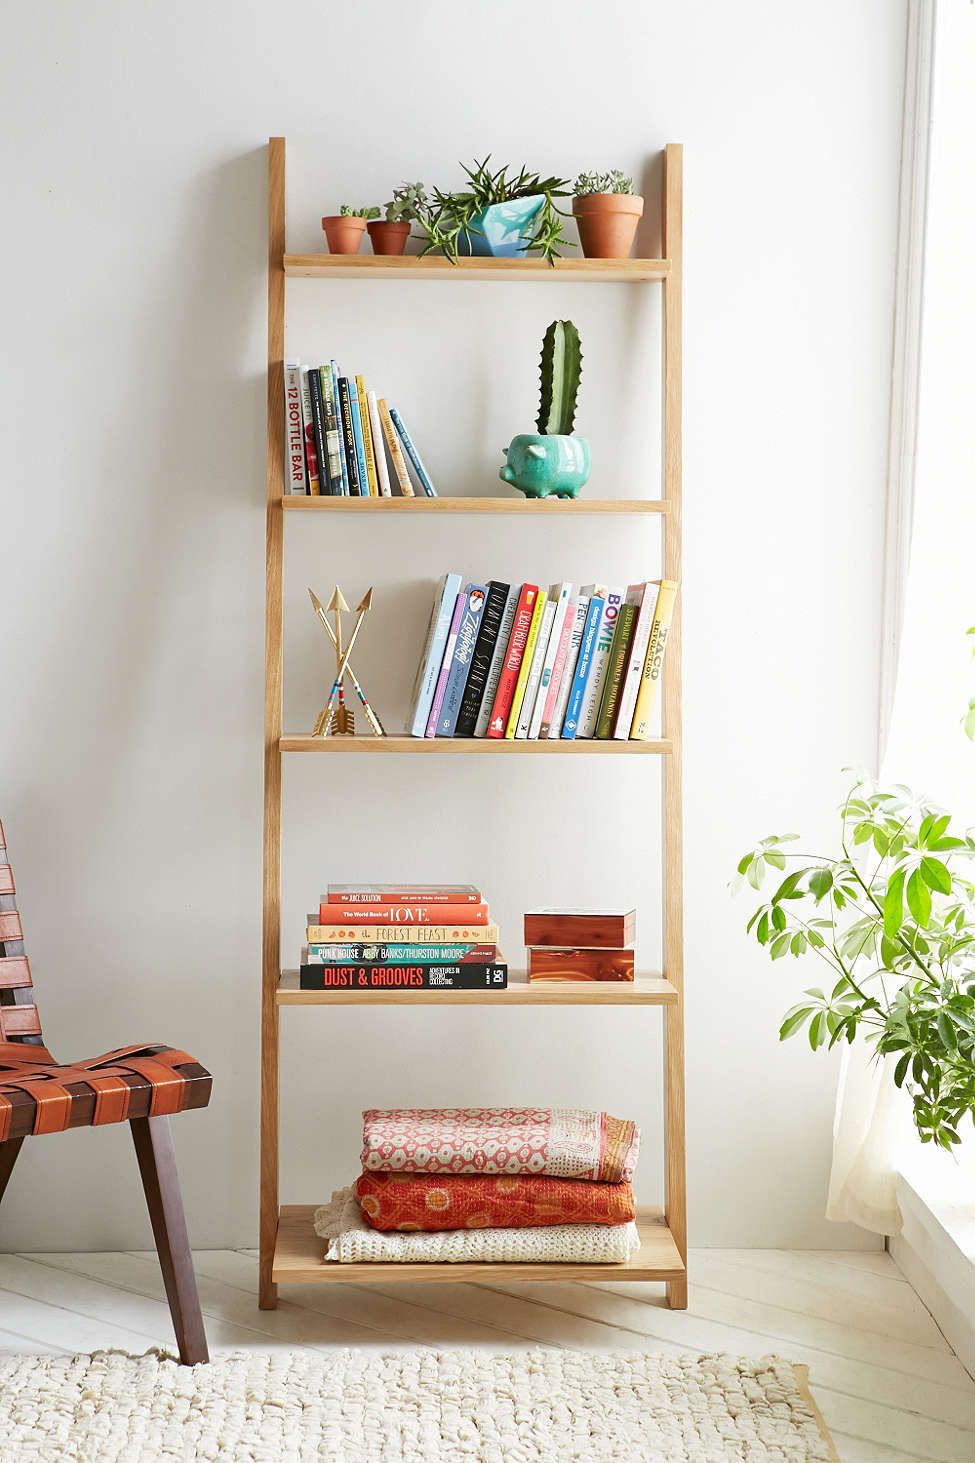 Leaning Bookshelf Design Possibilities – Casual With A Hint Of Originality